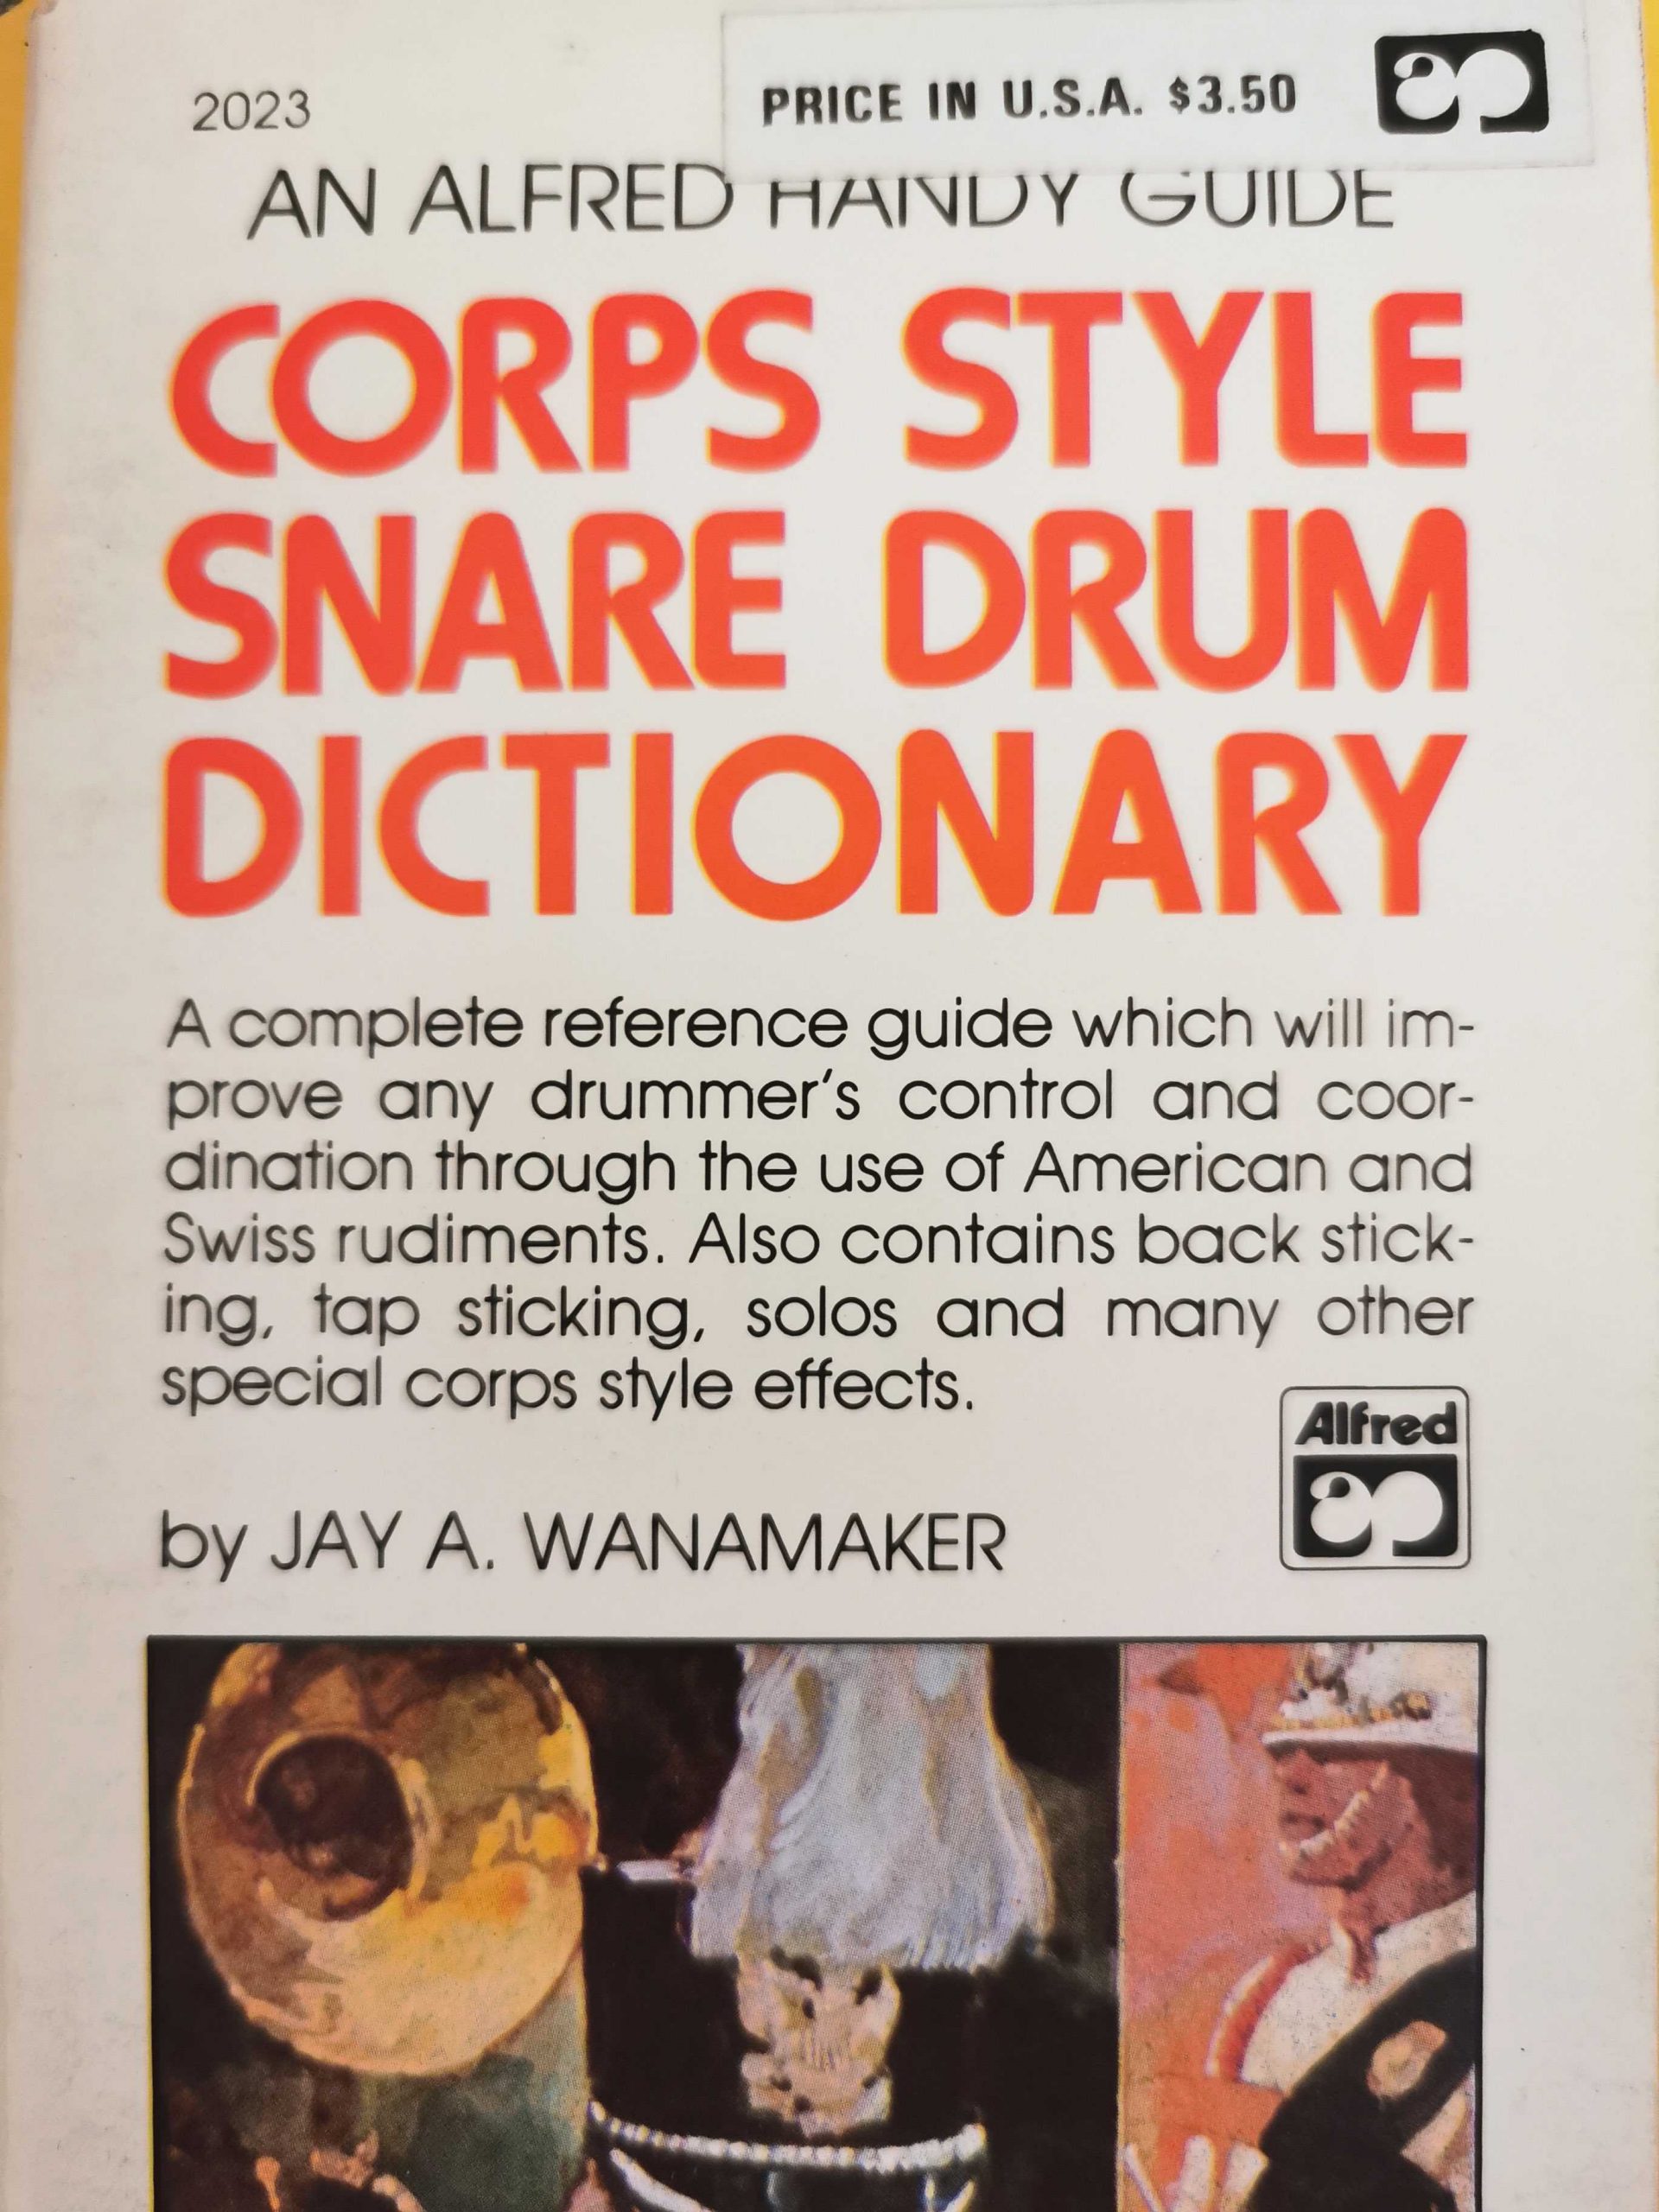 Corps Style Snare Drum Dictionary by Jay Wanamaker